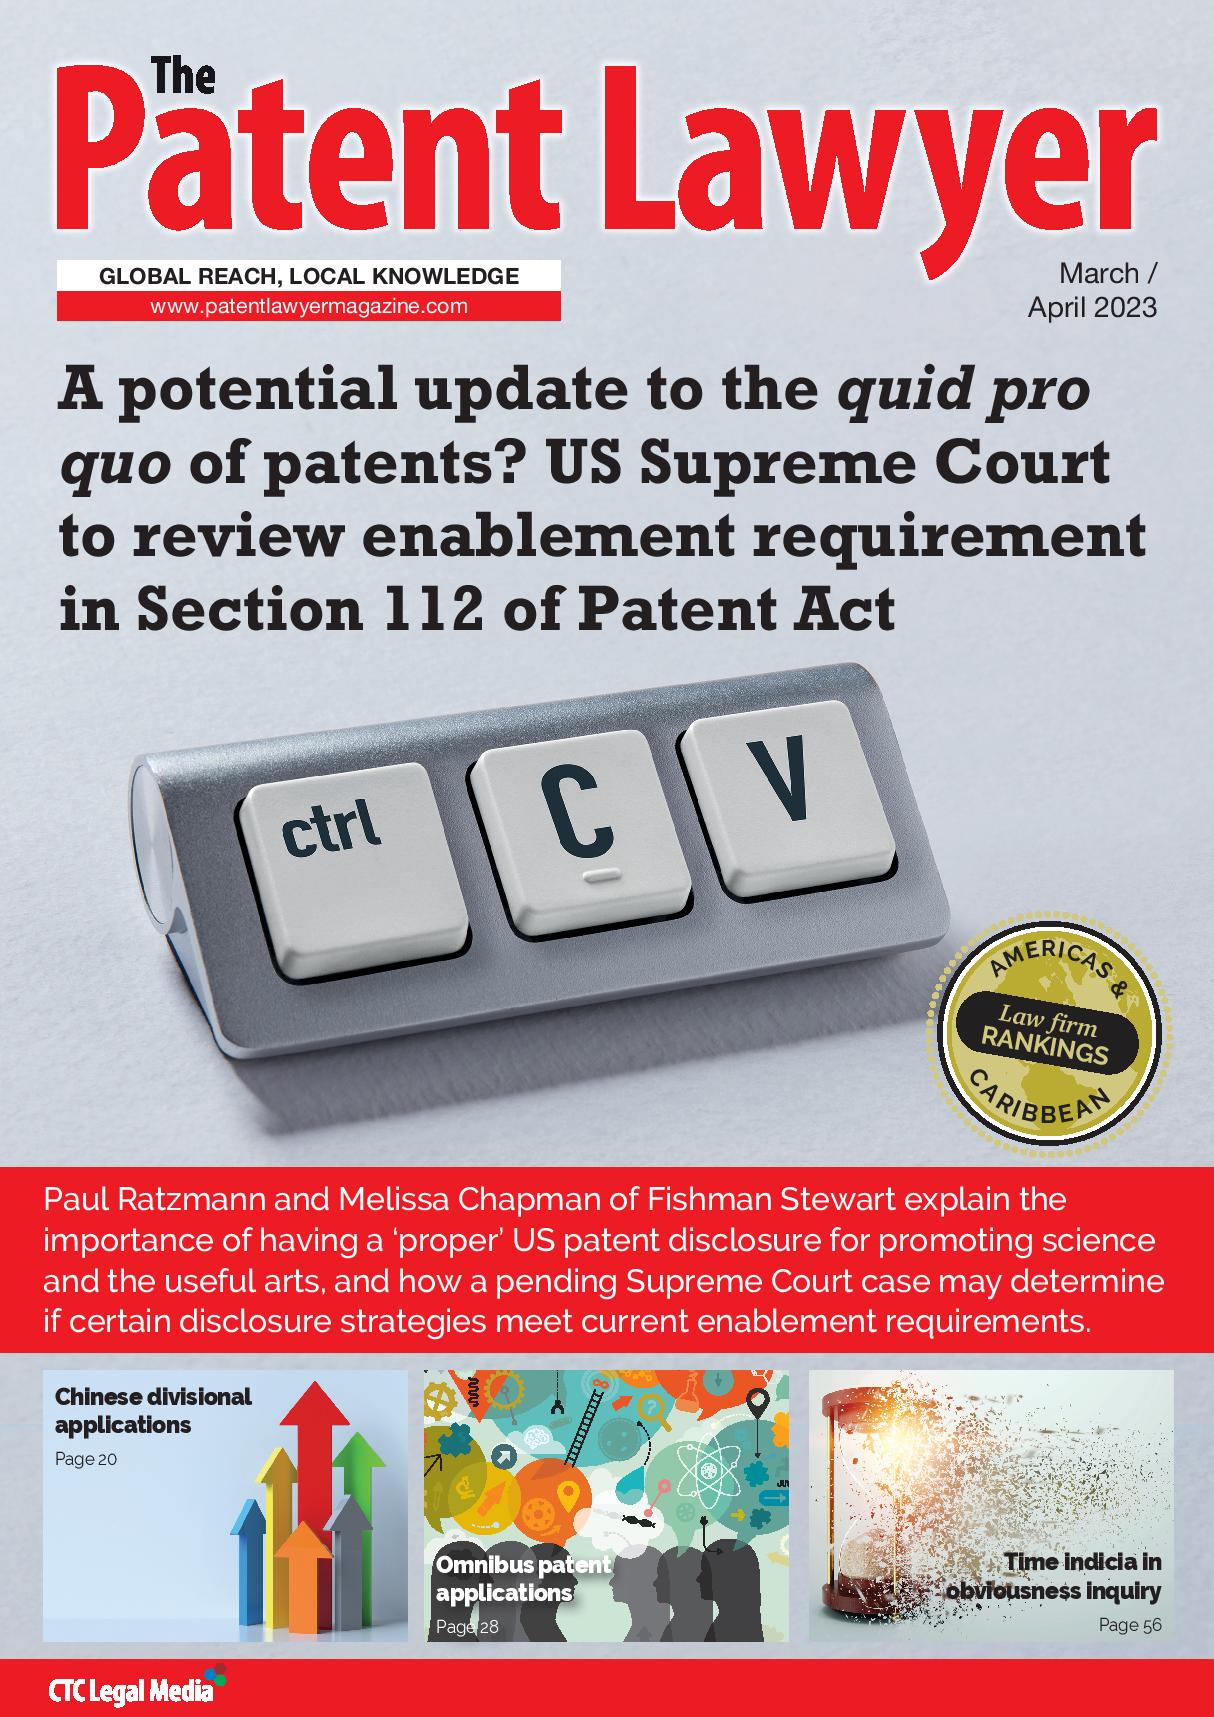 The Patent Lawyer March/April 2023